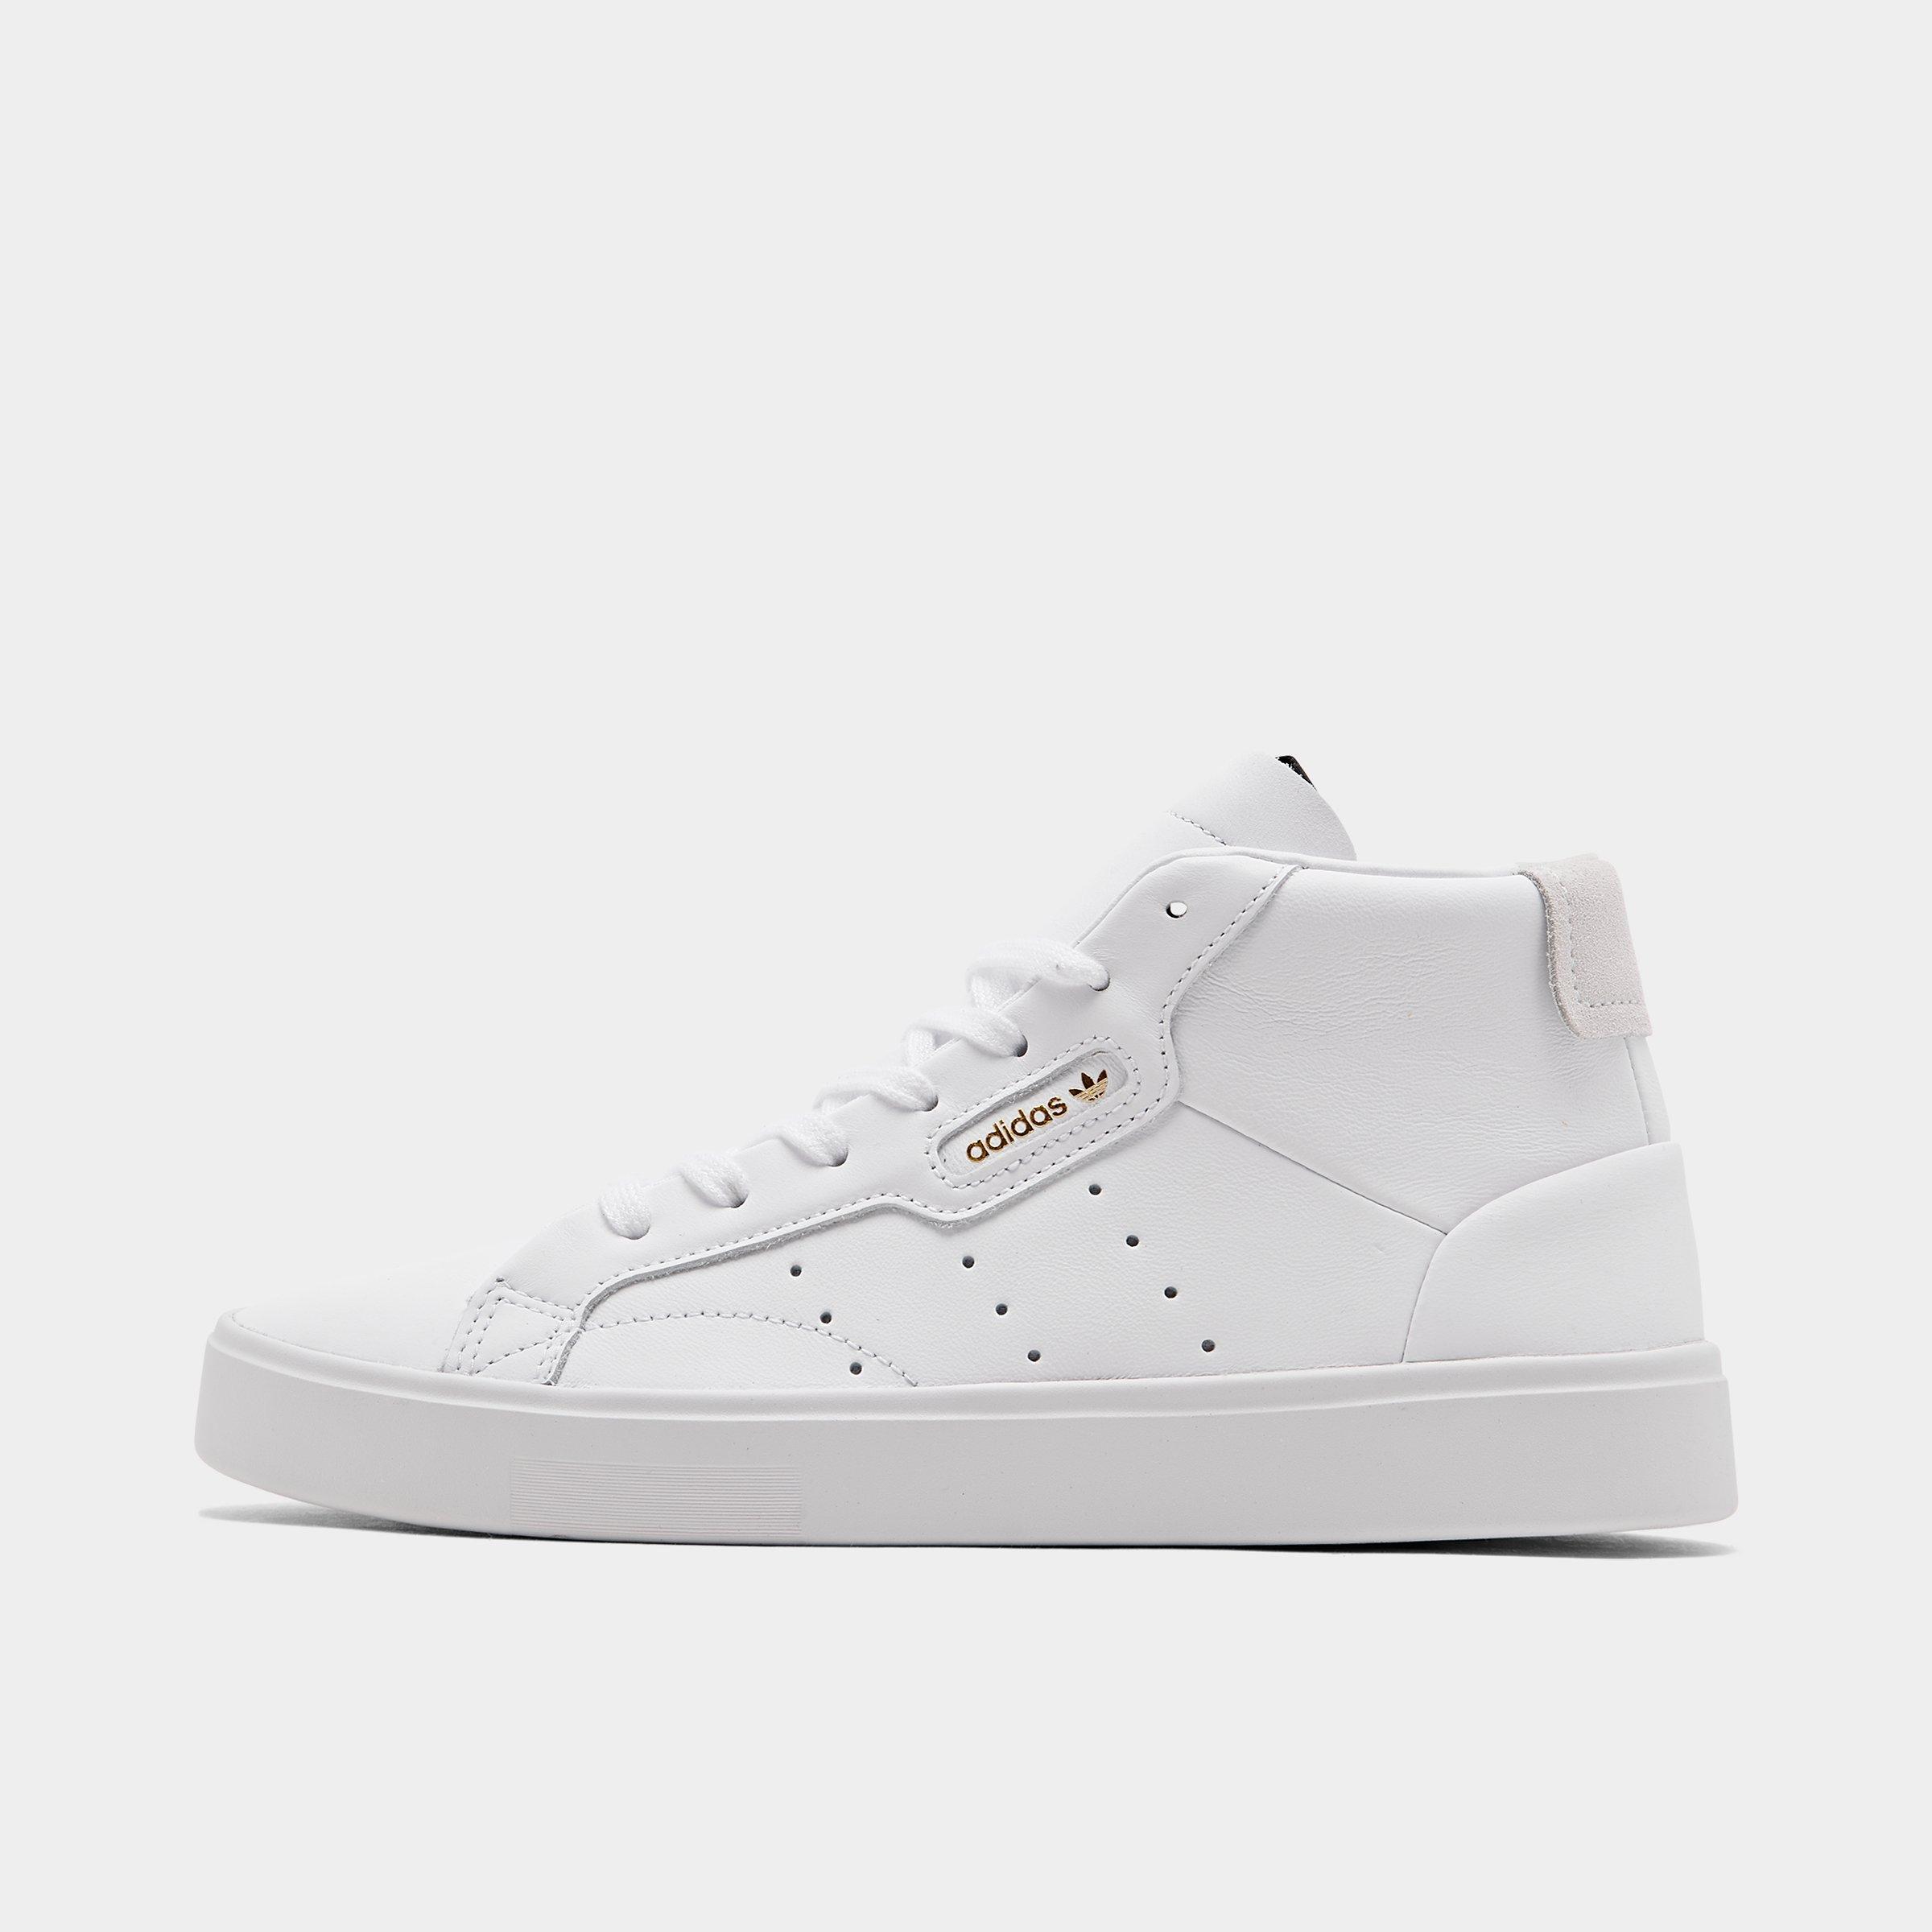 adidas originals sleek mid top sneakers in white and gray